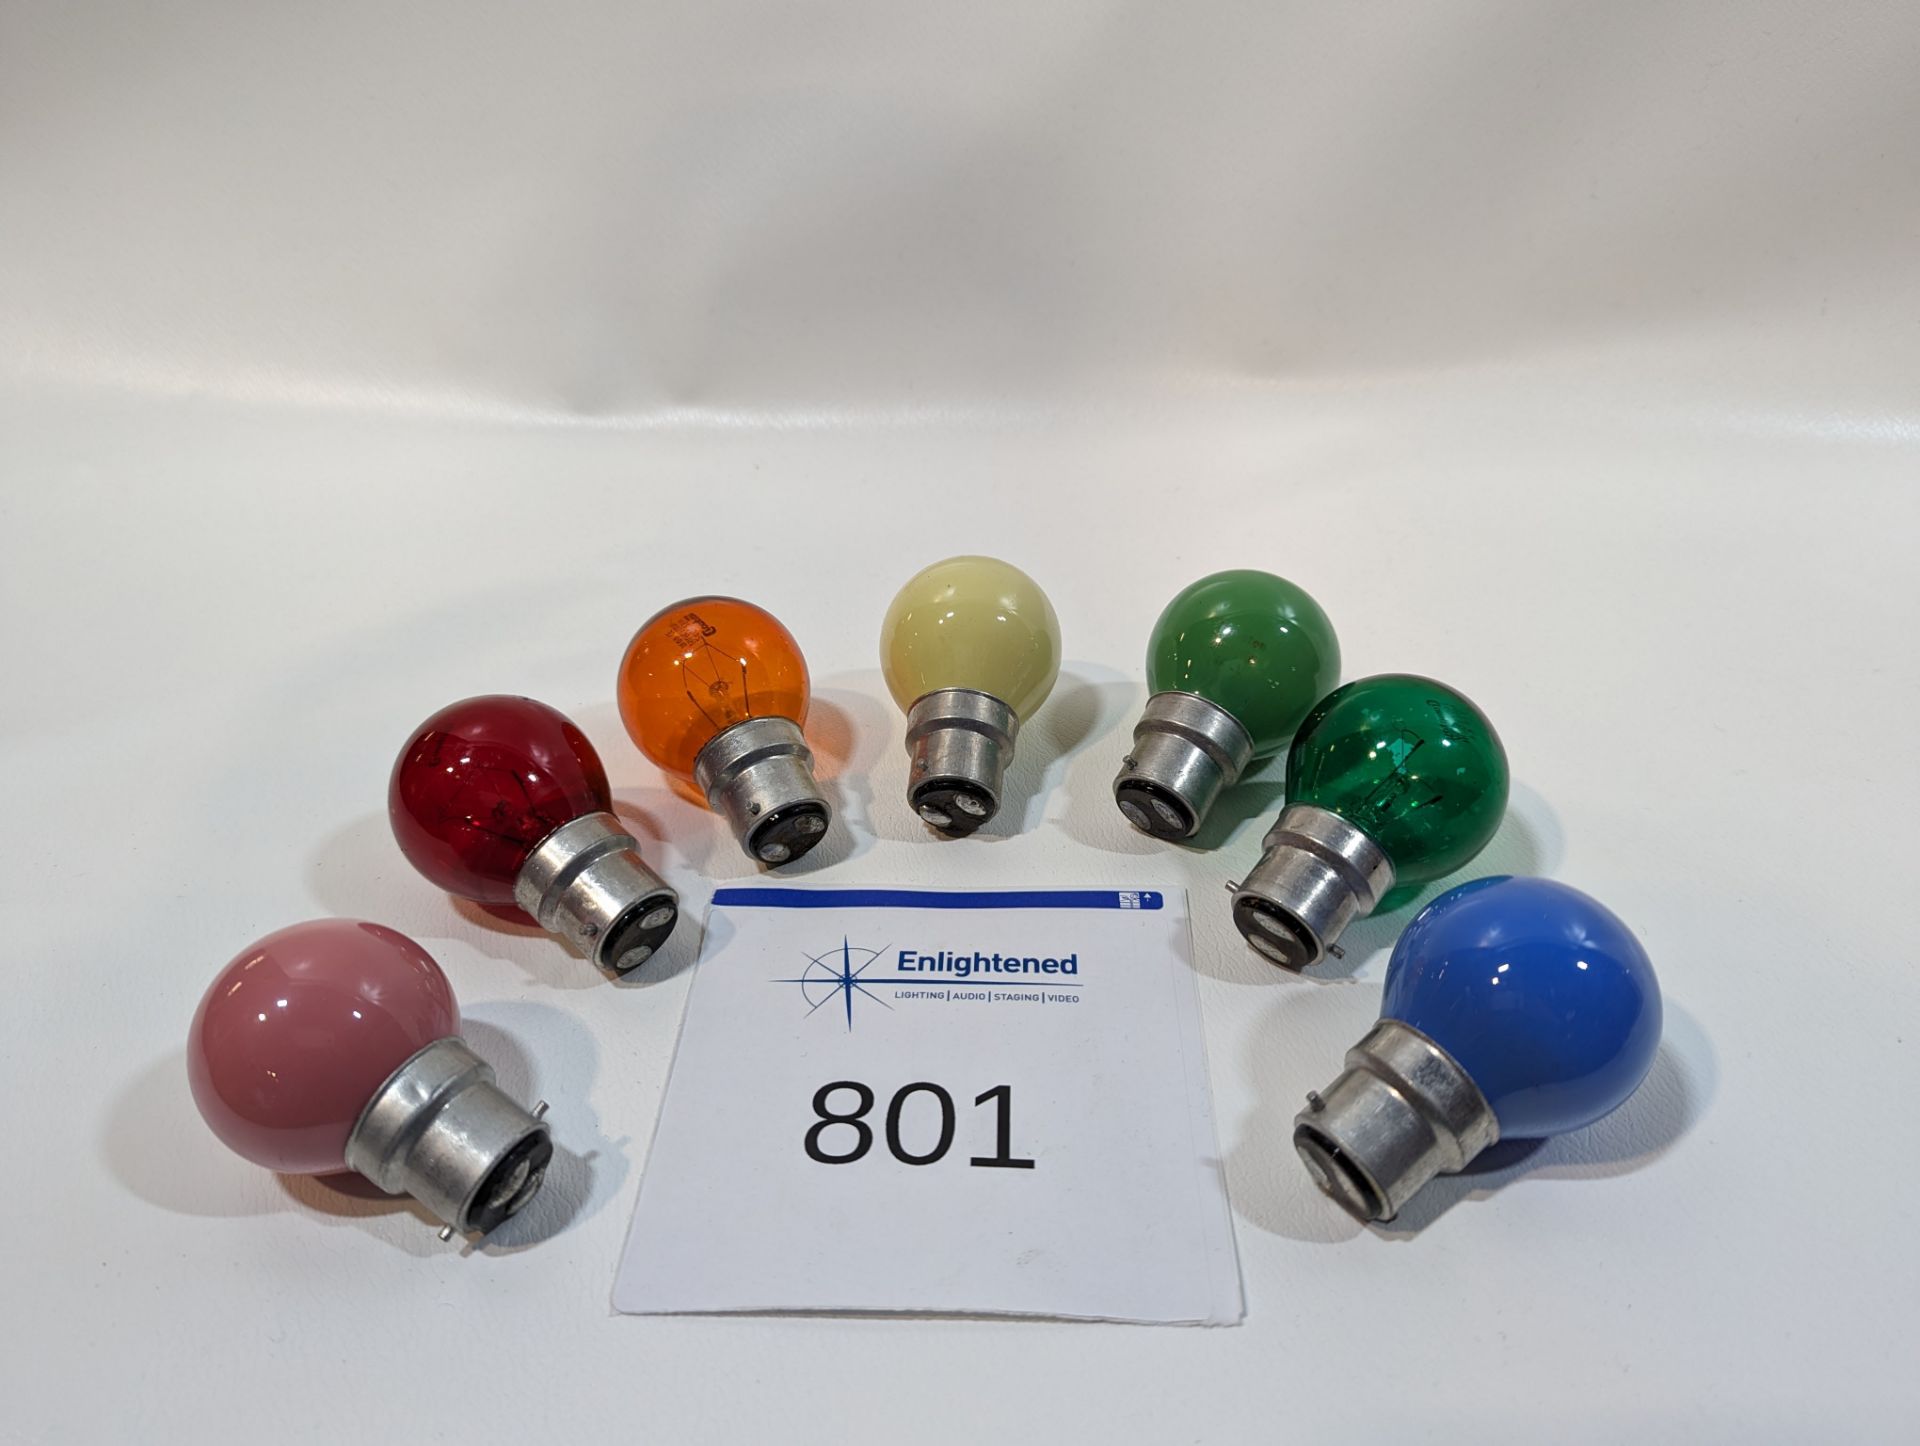 BC 25w Glass Multi colour festoon lamps approx - 417 - Image 3 of 3